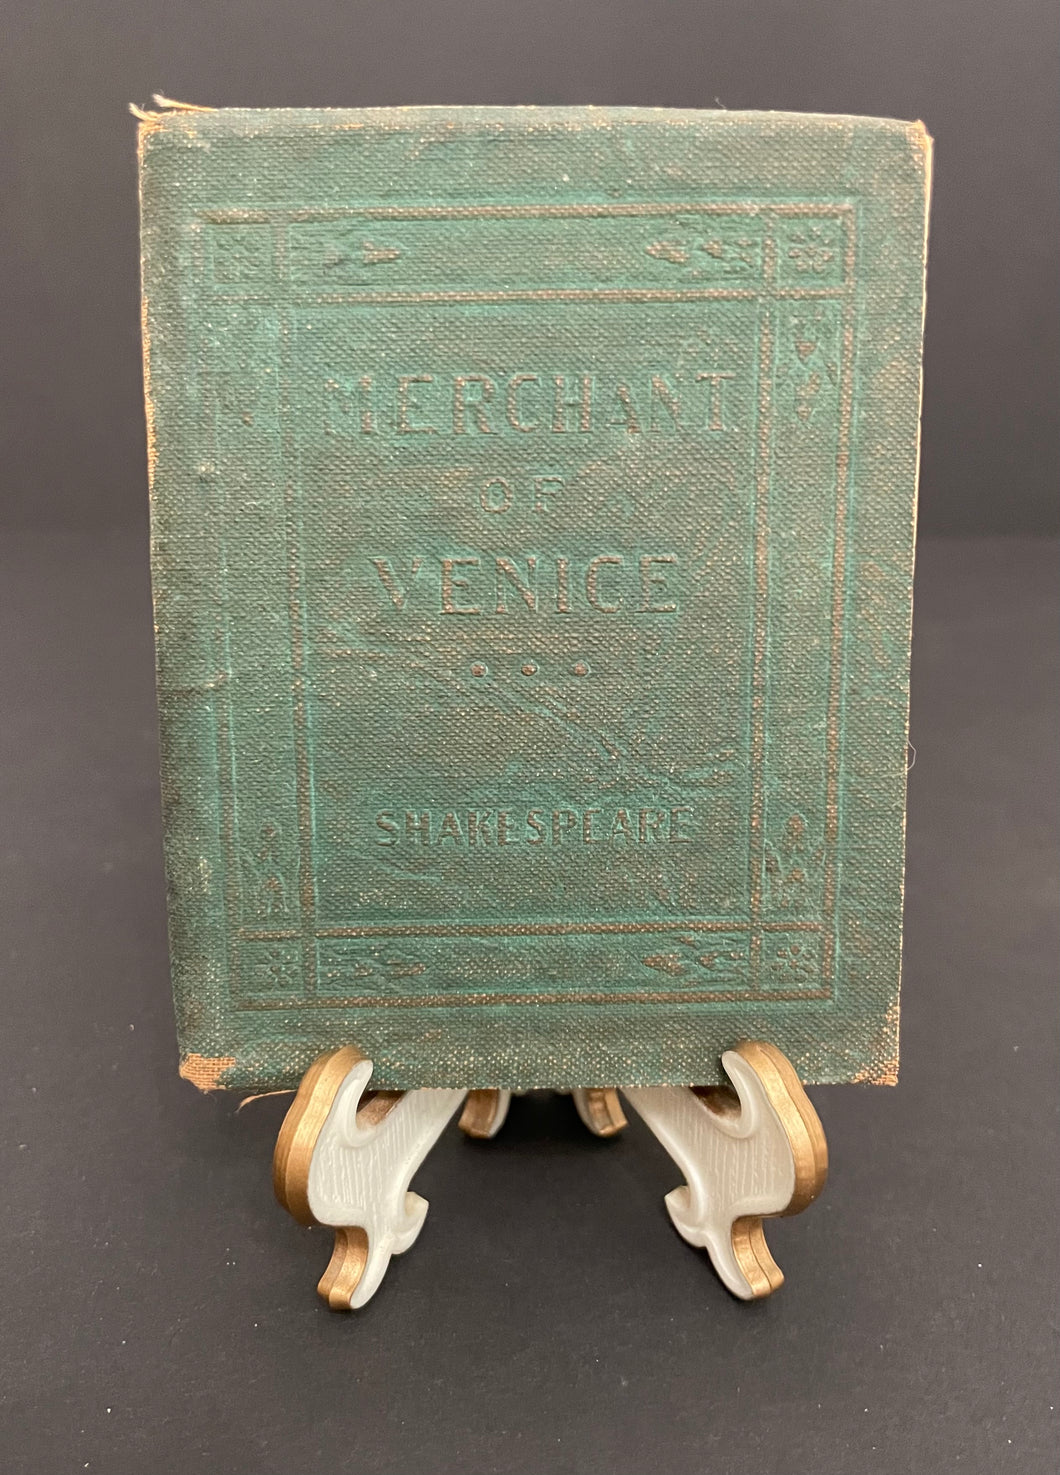 Antique Little Leather Library “Merchant of Venice” by Shakespeare Book